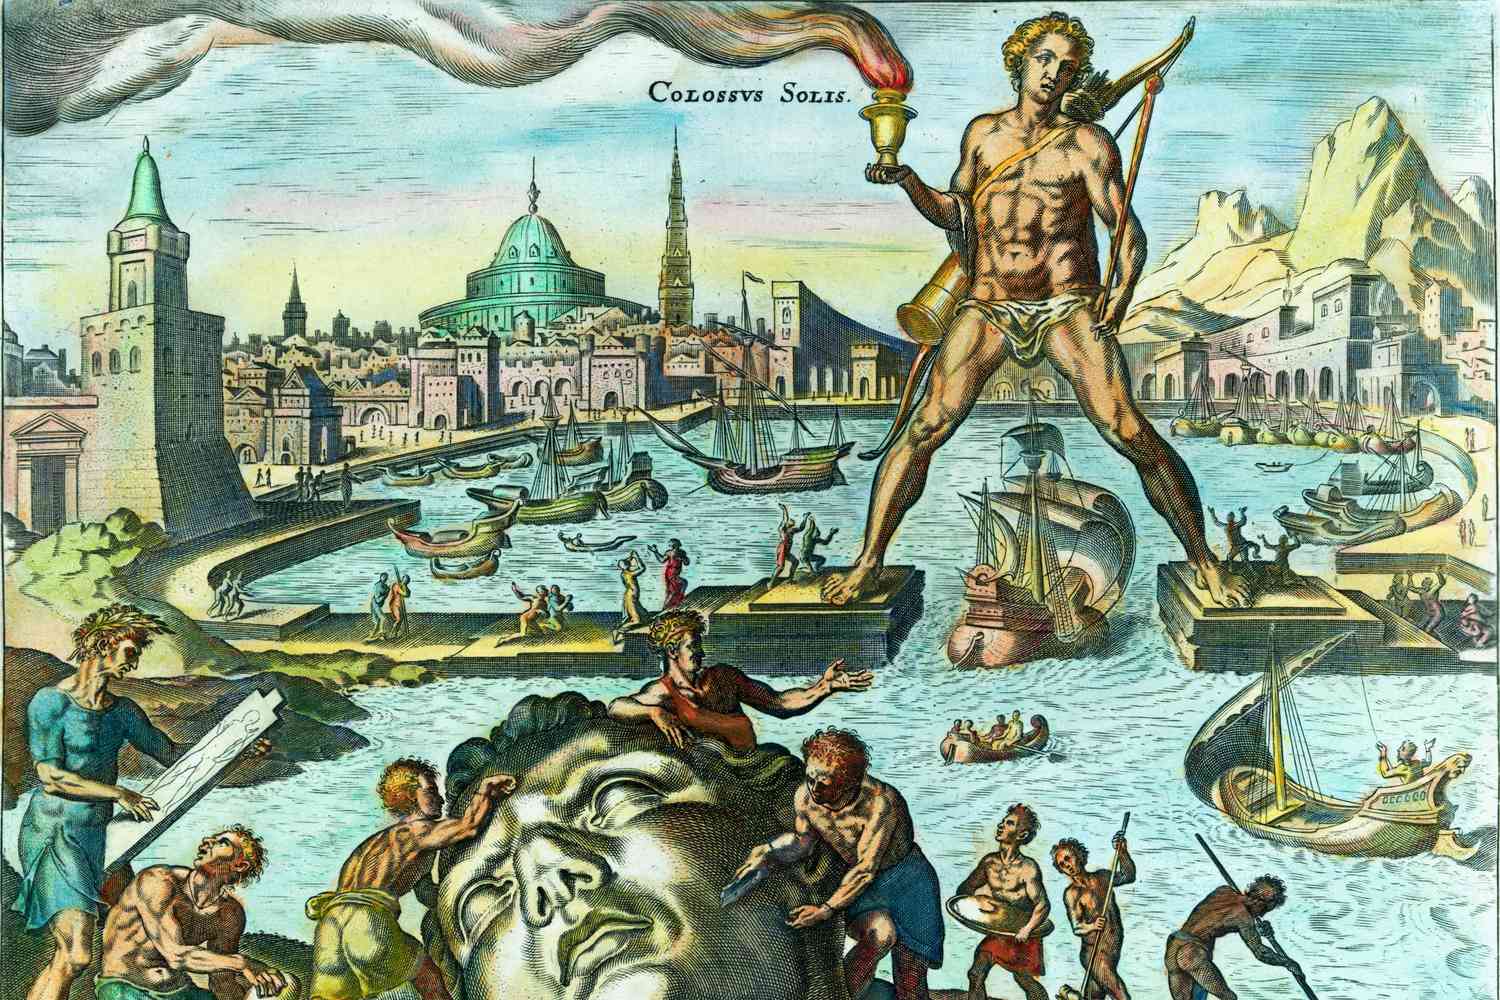 The Colossus at Rhodes